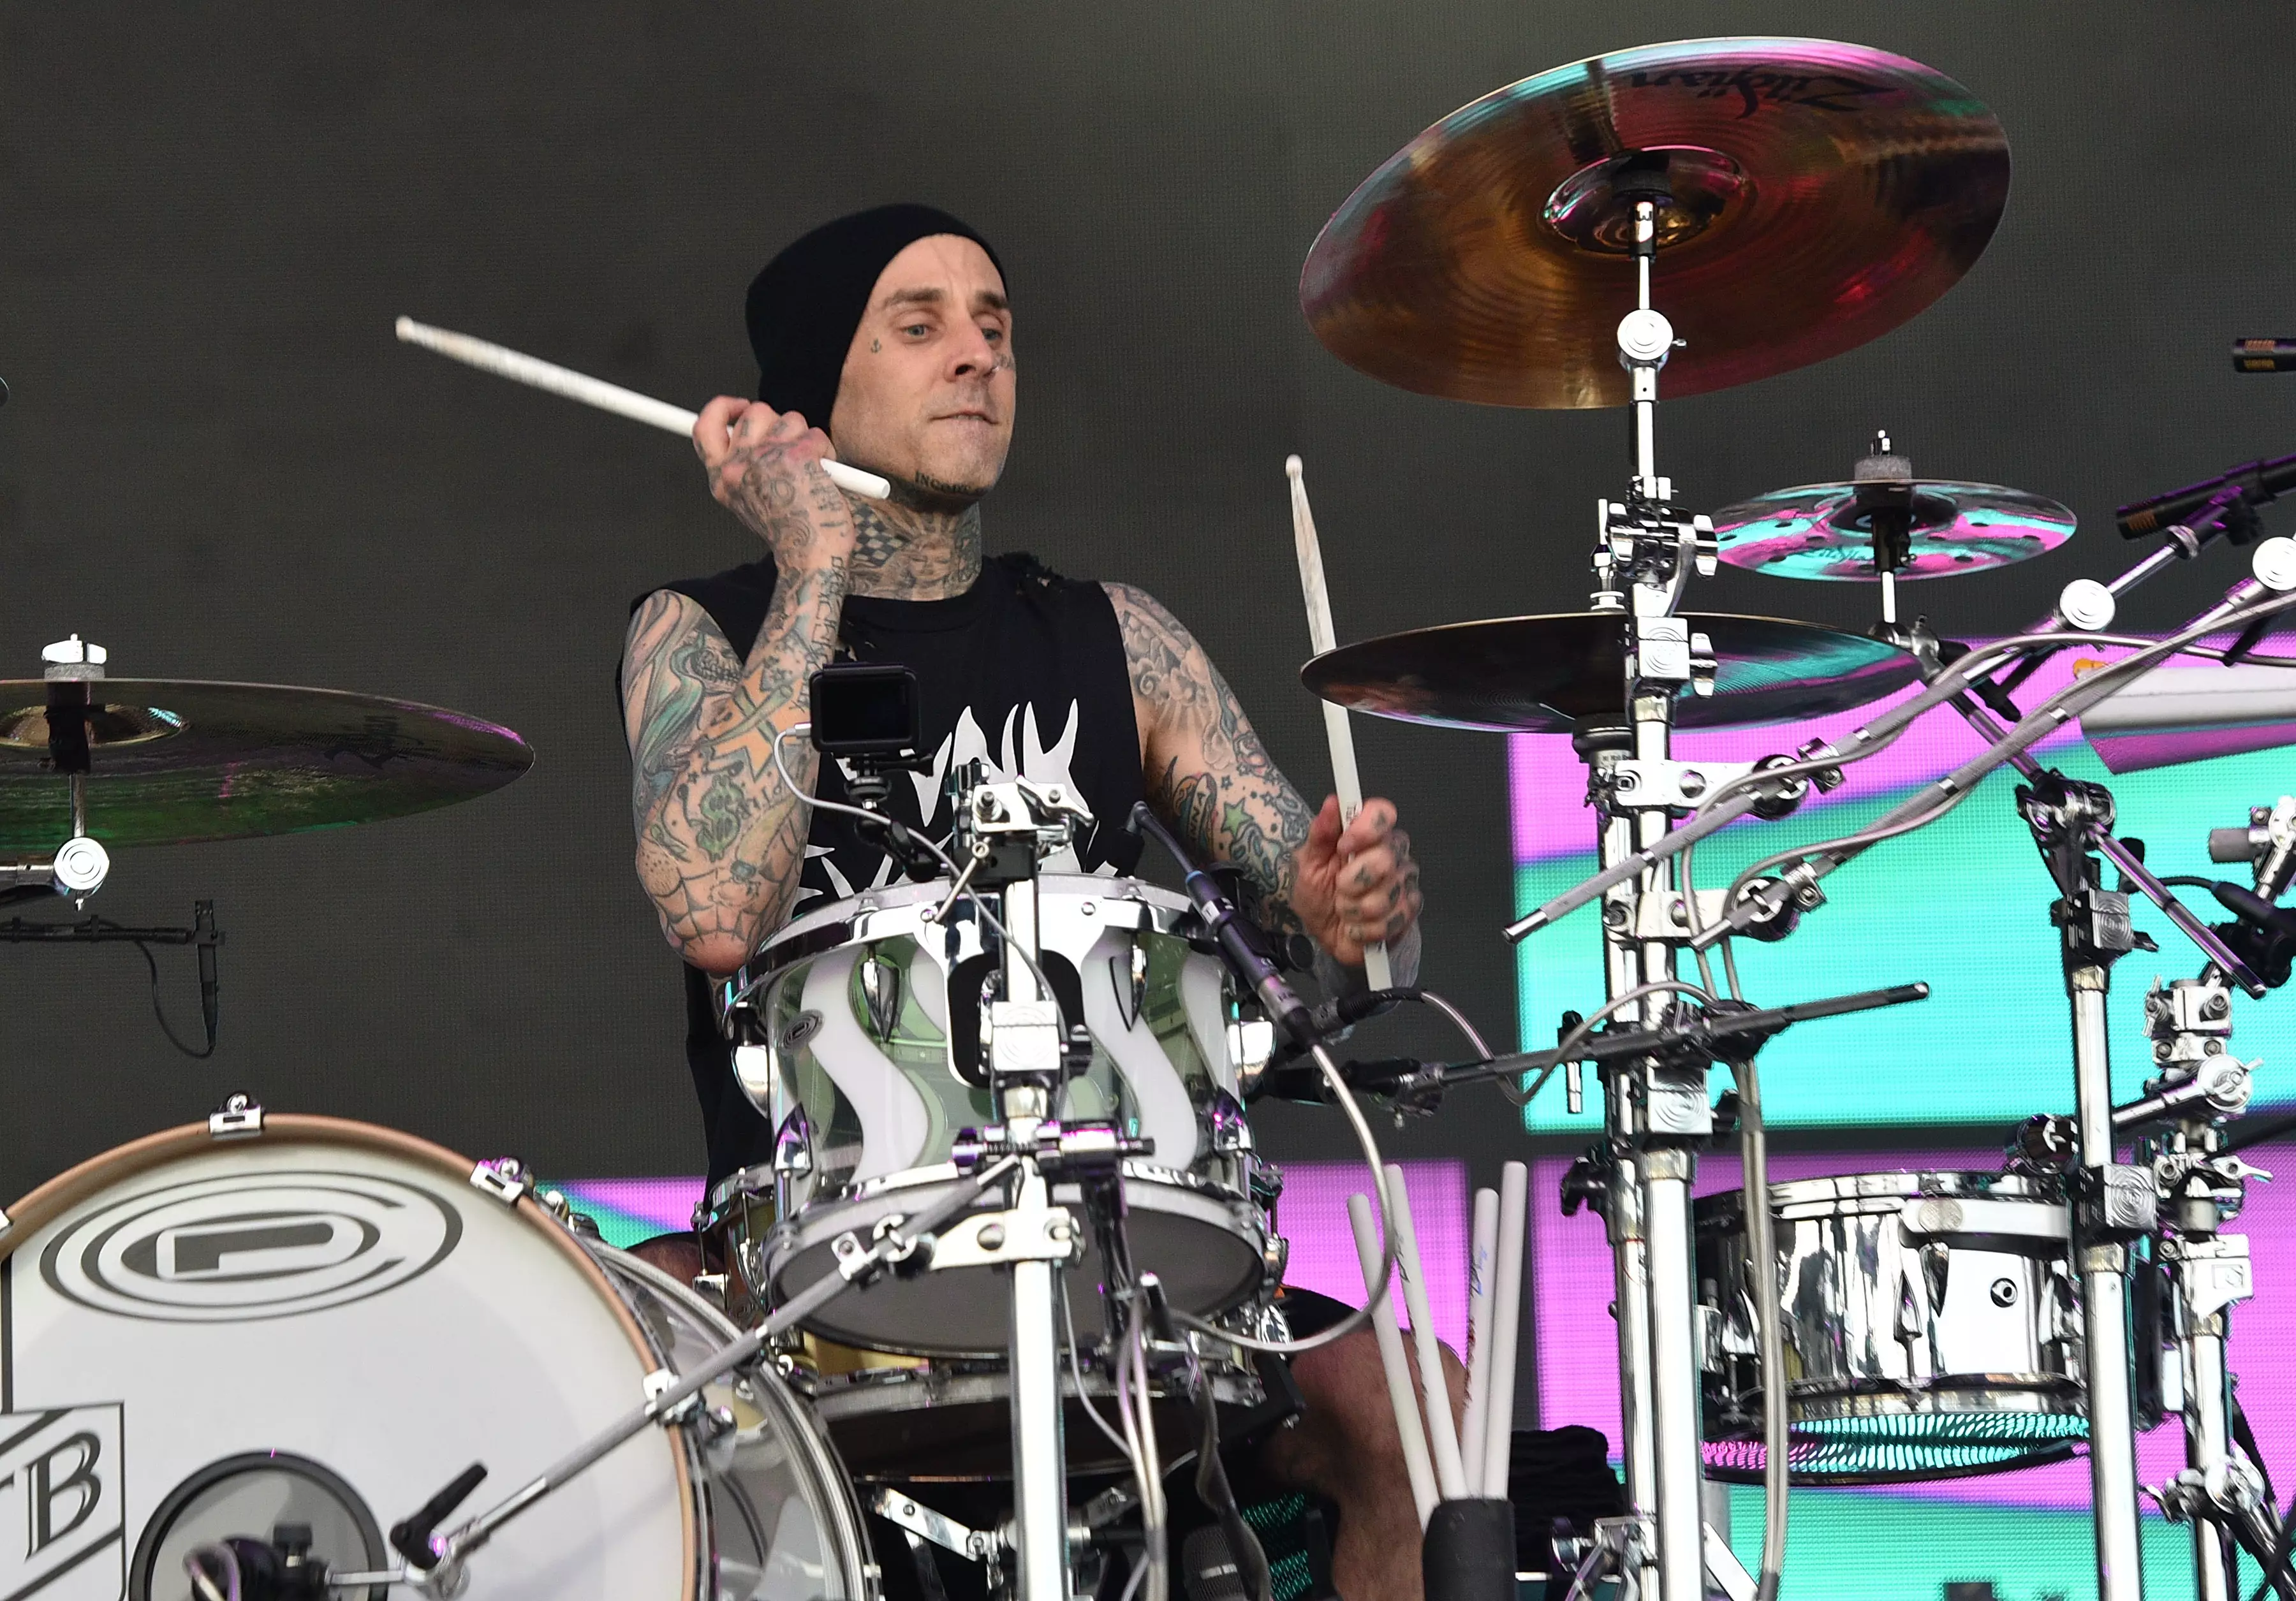 Travis Barker performing at the Outside Lands music festival in 2019 (